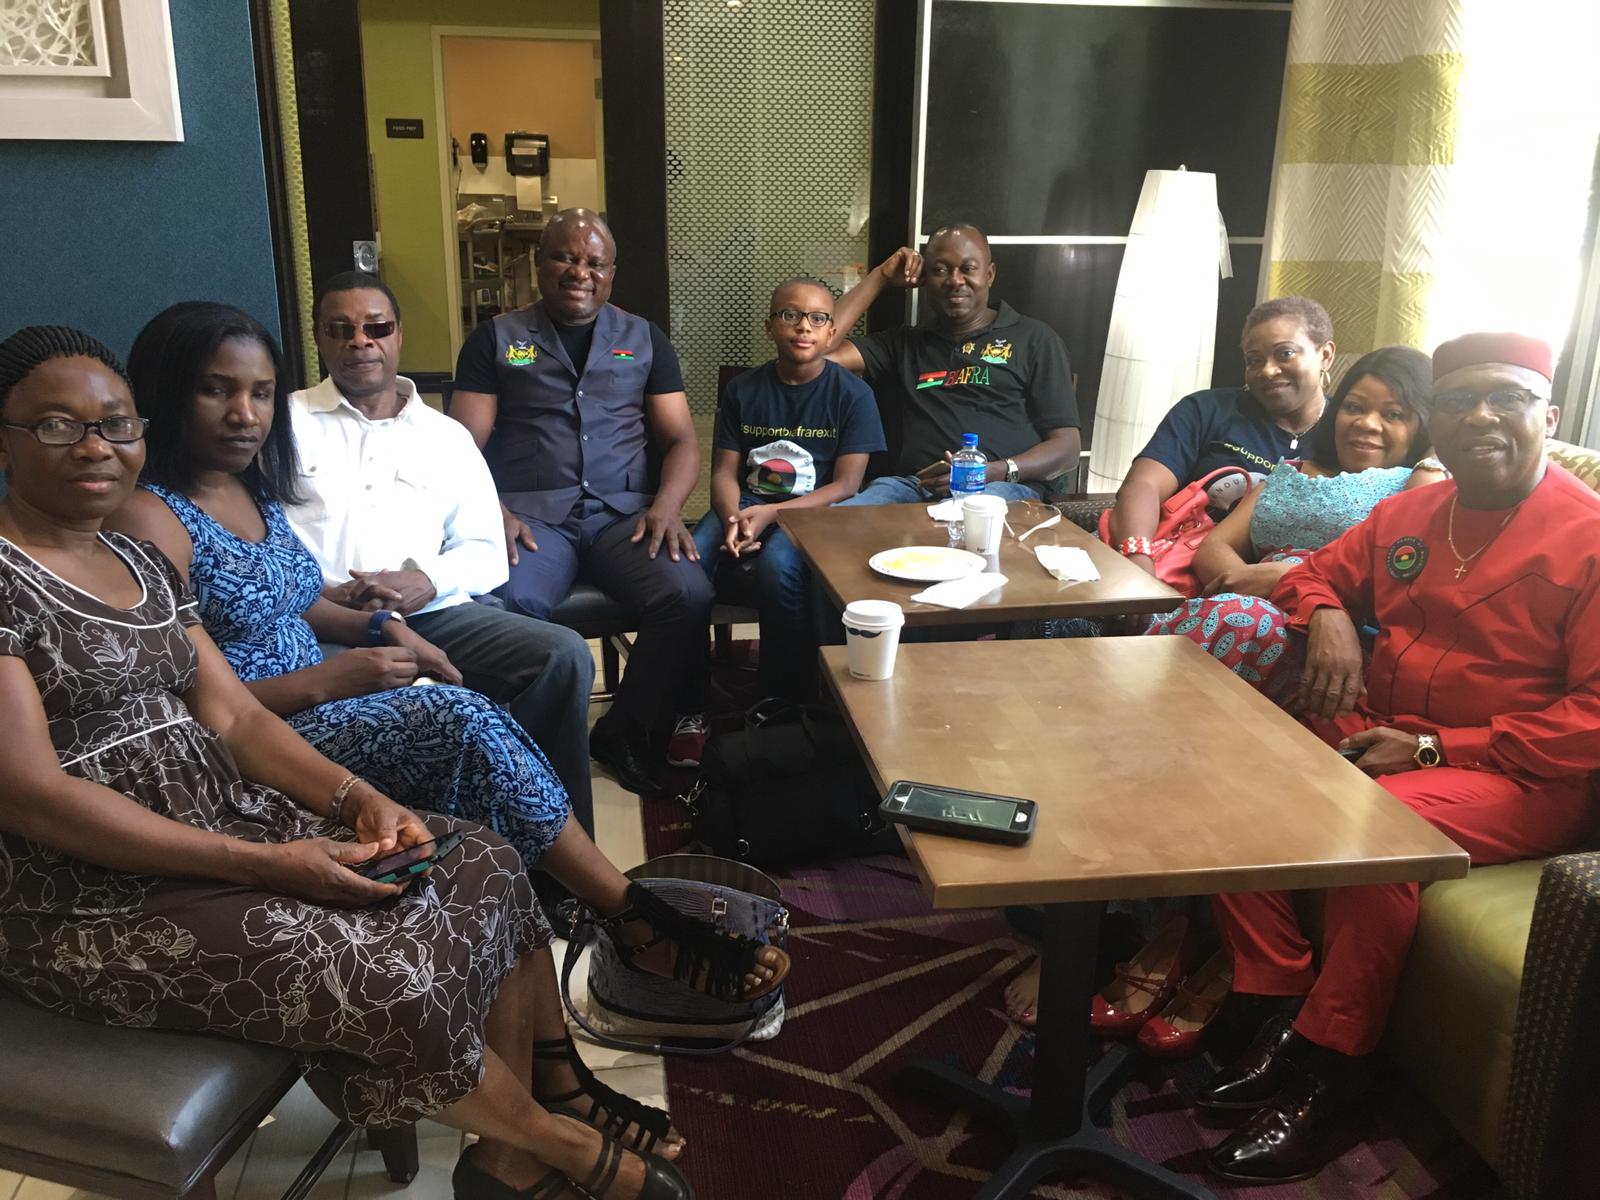  IPOB Houston Leadership conducts a brief meeting during Director Nnamdi Kanu’s visit on June 22, 2019 